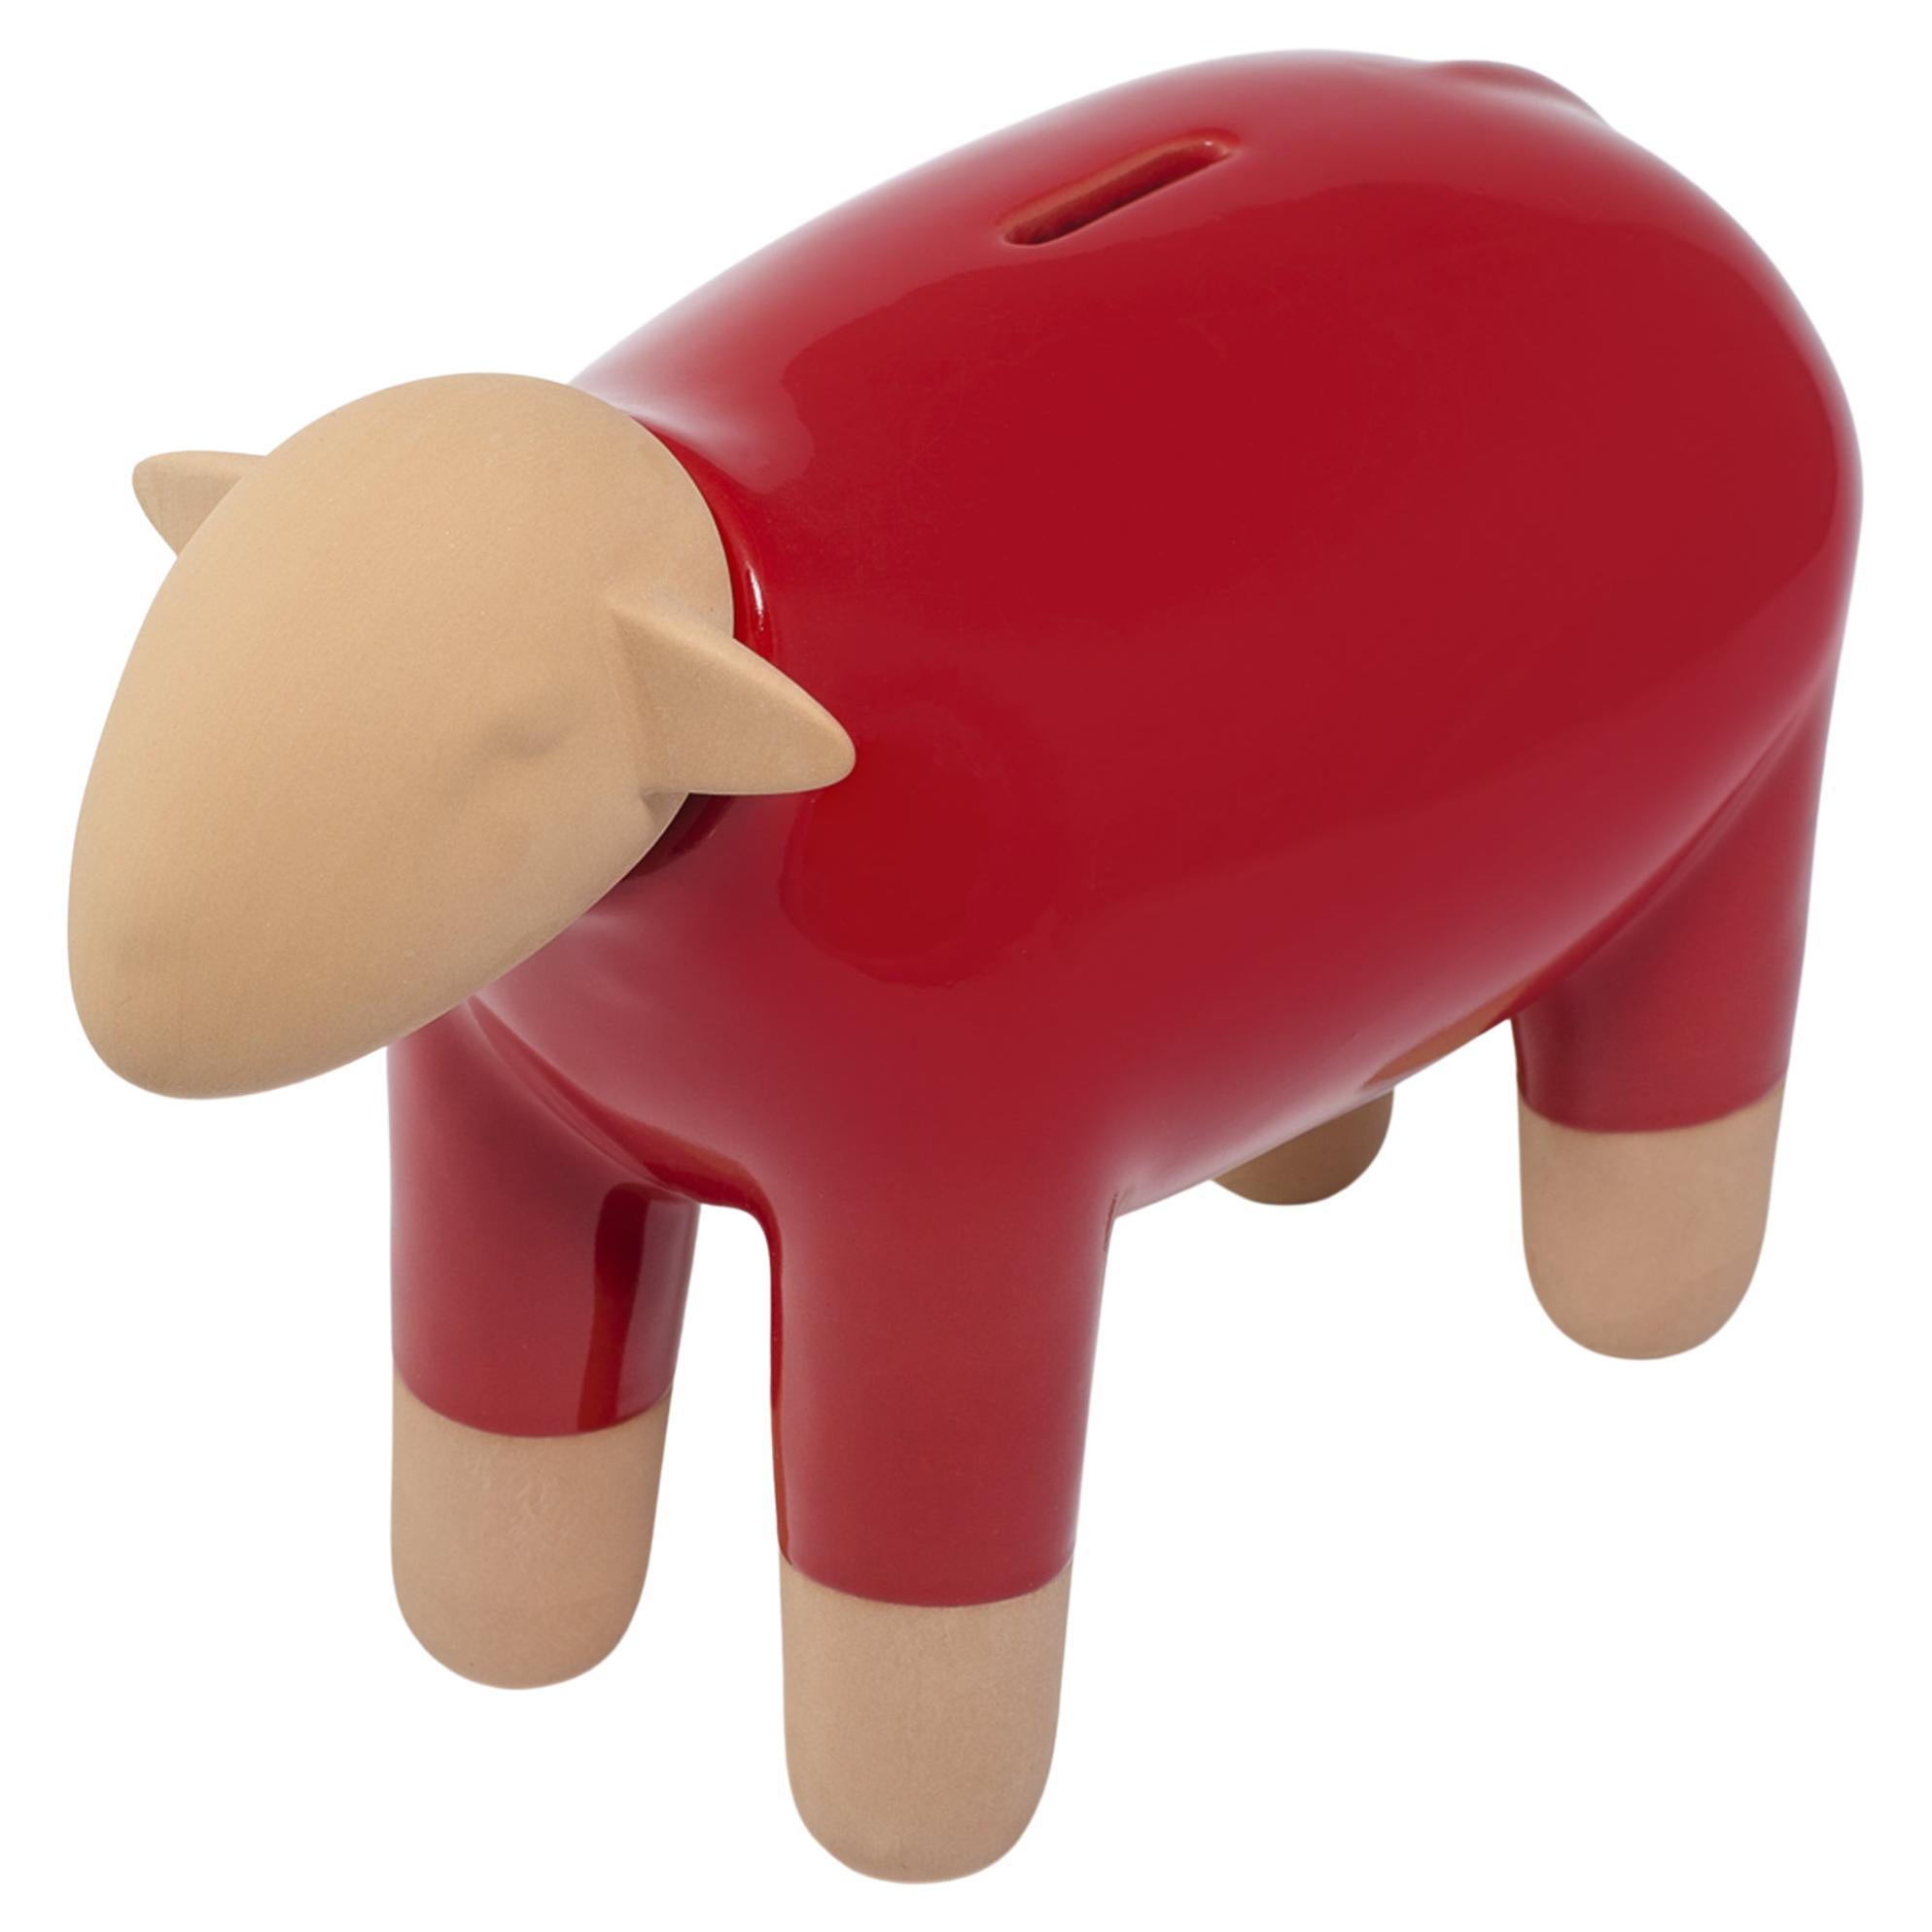 Sheep Moneybox Pop Art, Red, Made in Italy, 2022, New Collection